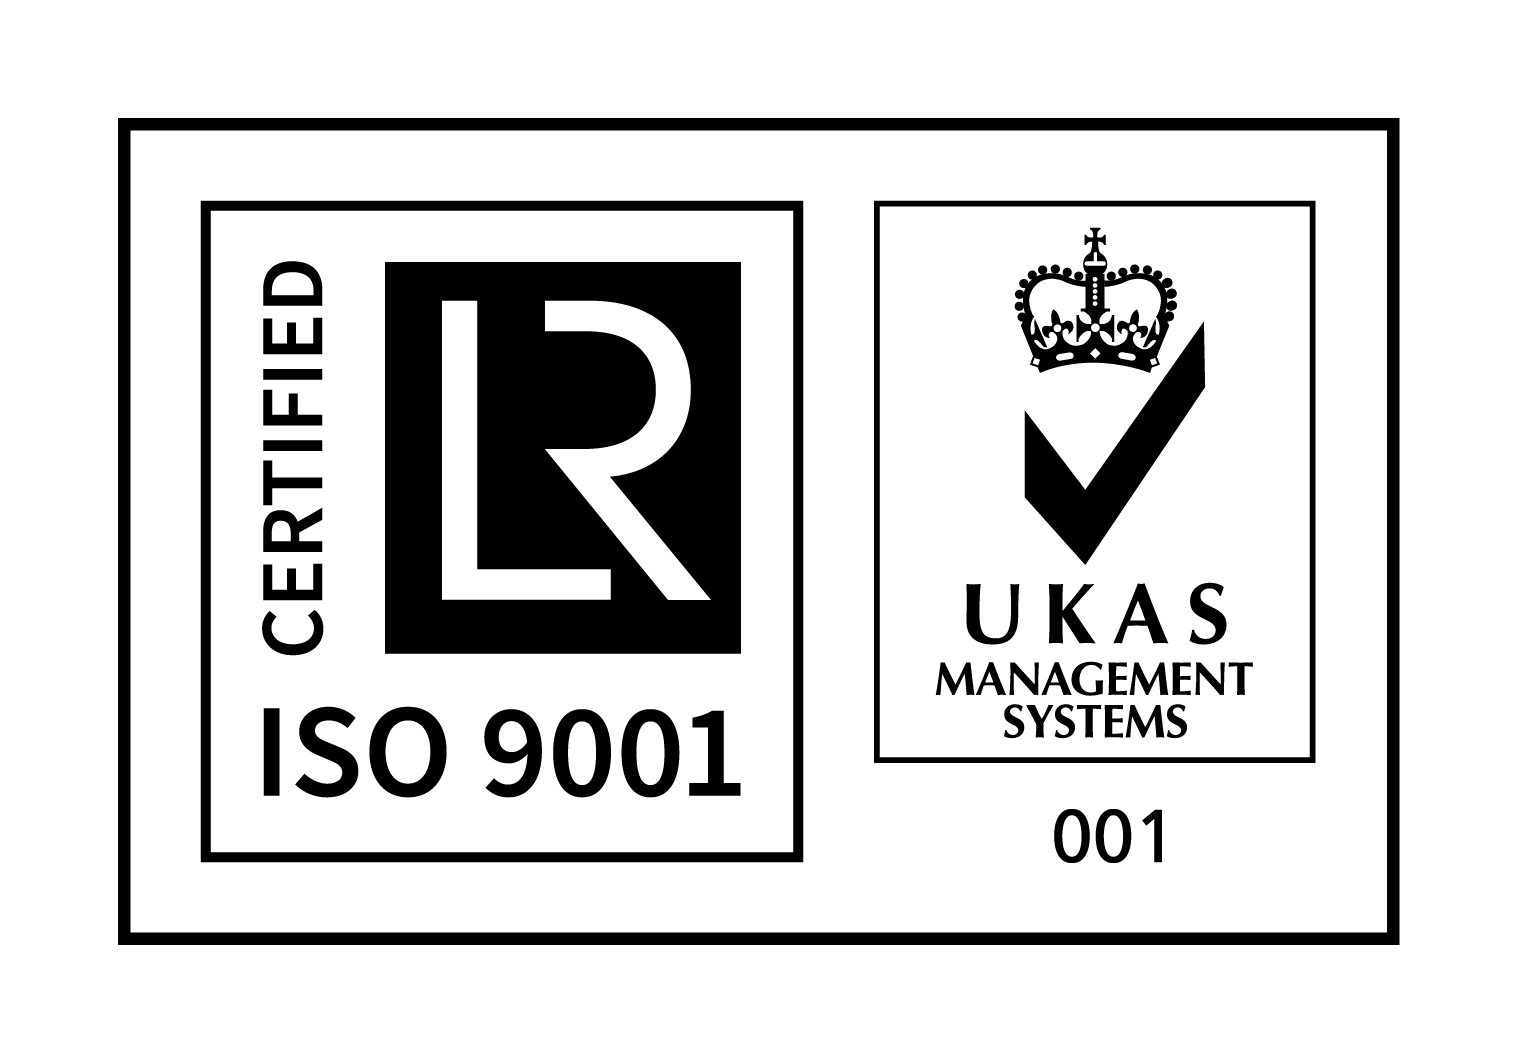 UKAS Management Systems - ISO 9001